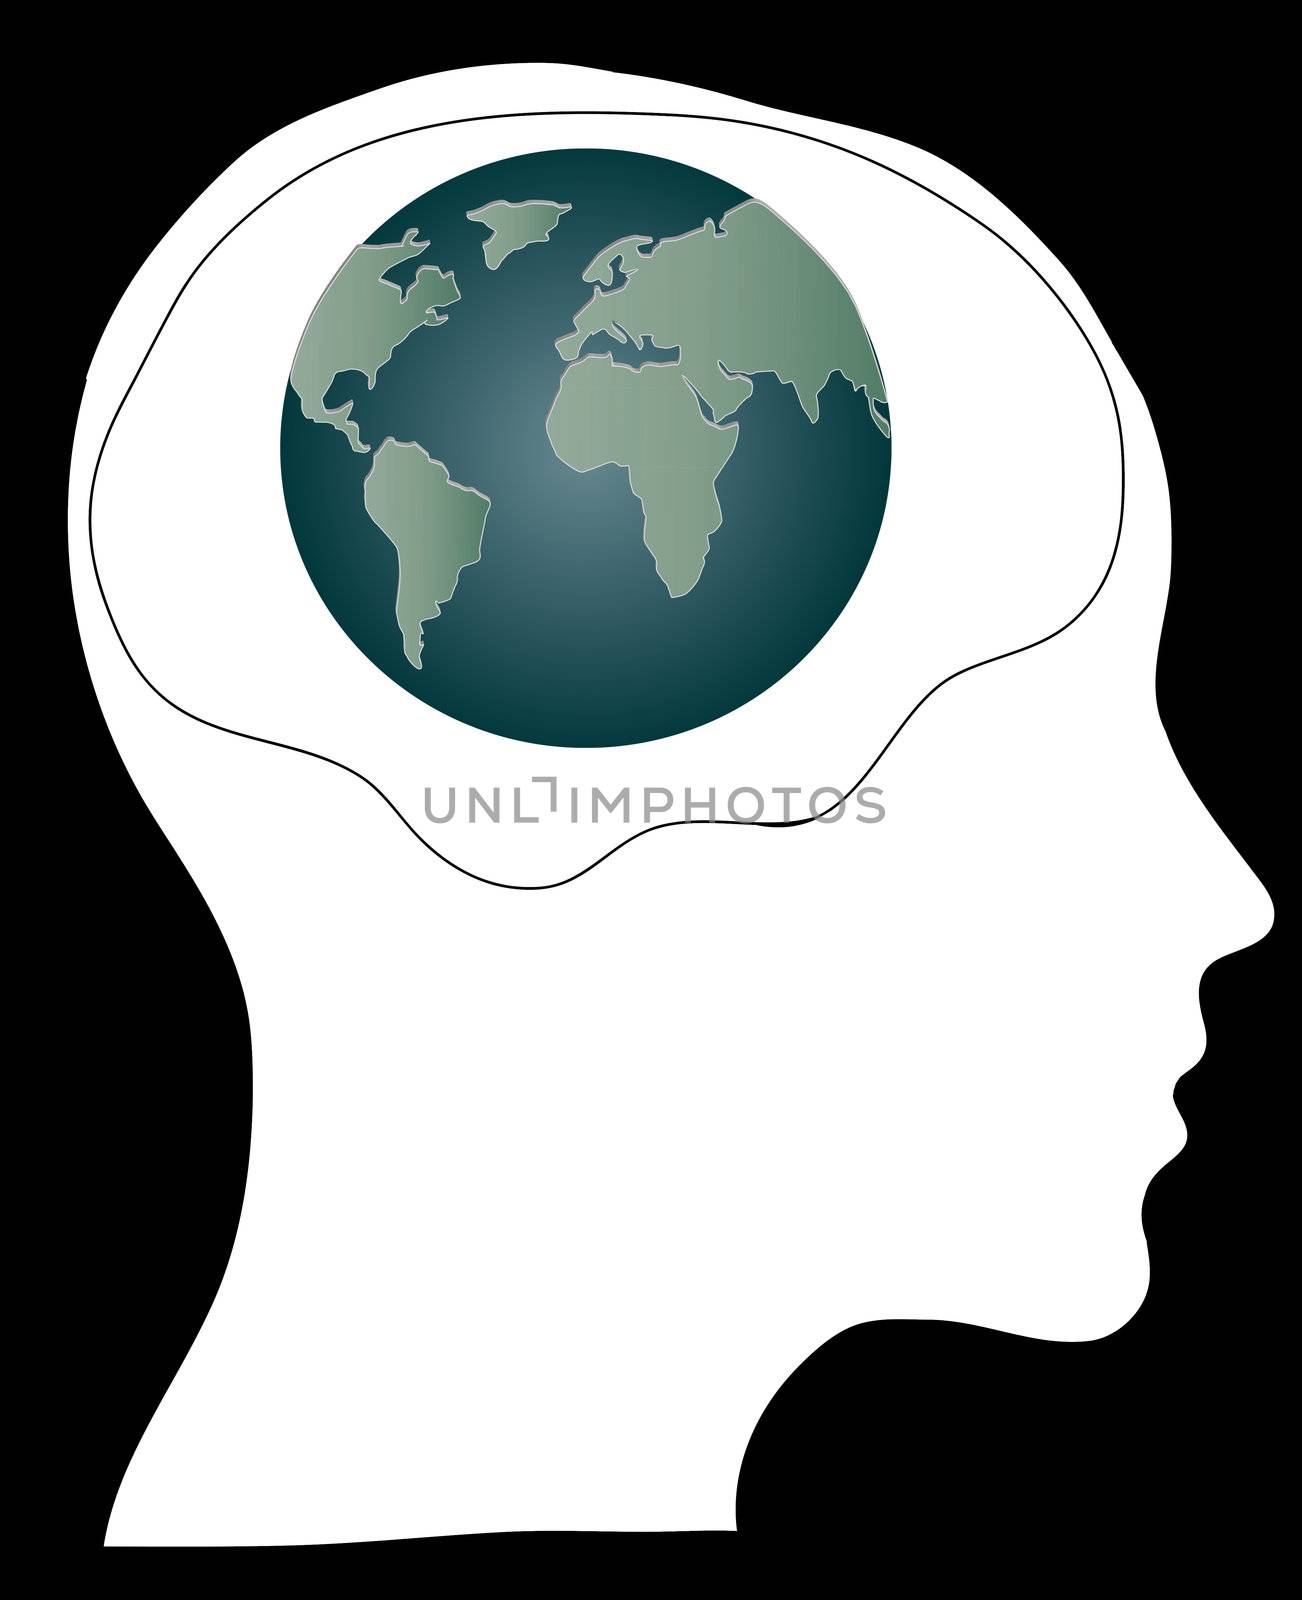 world of the human mind Isolated over background